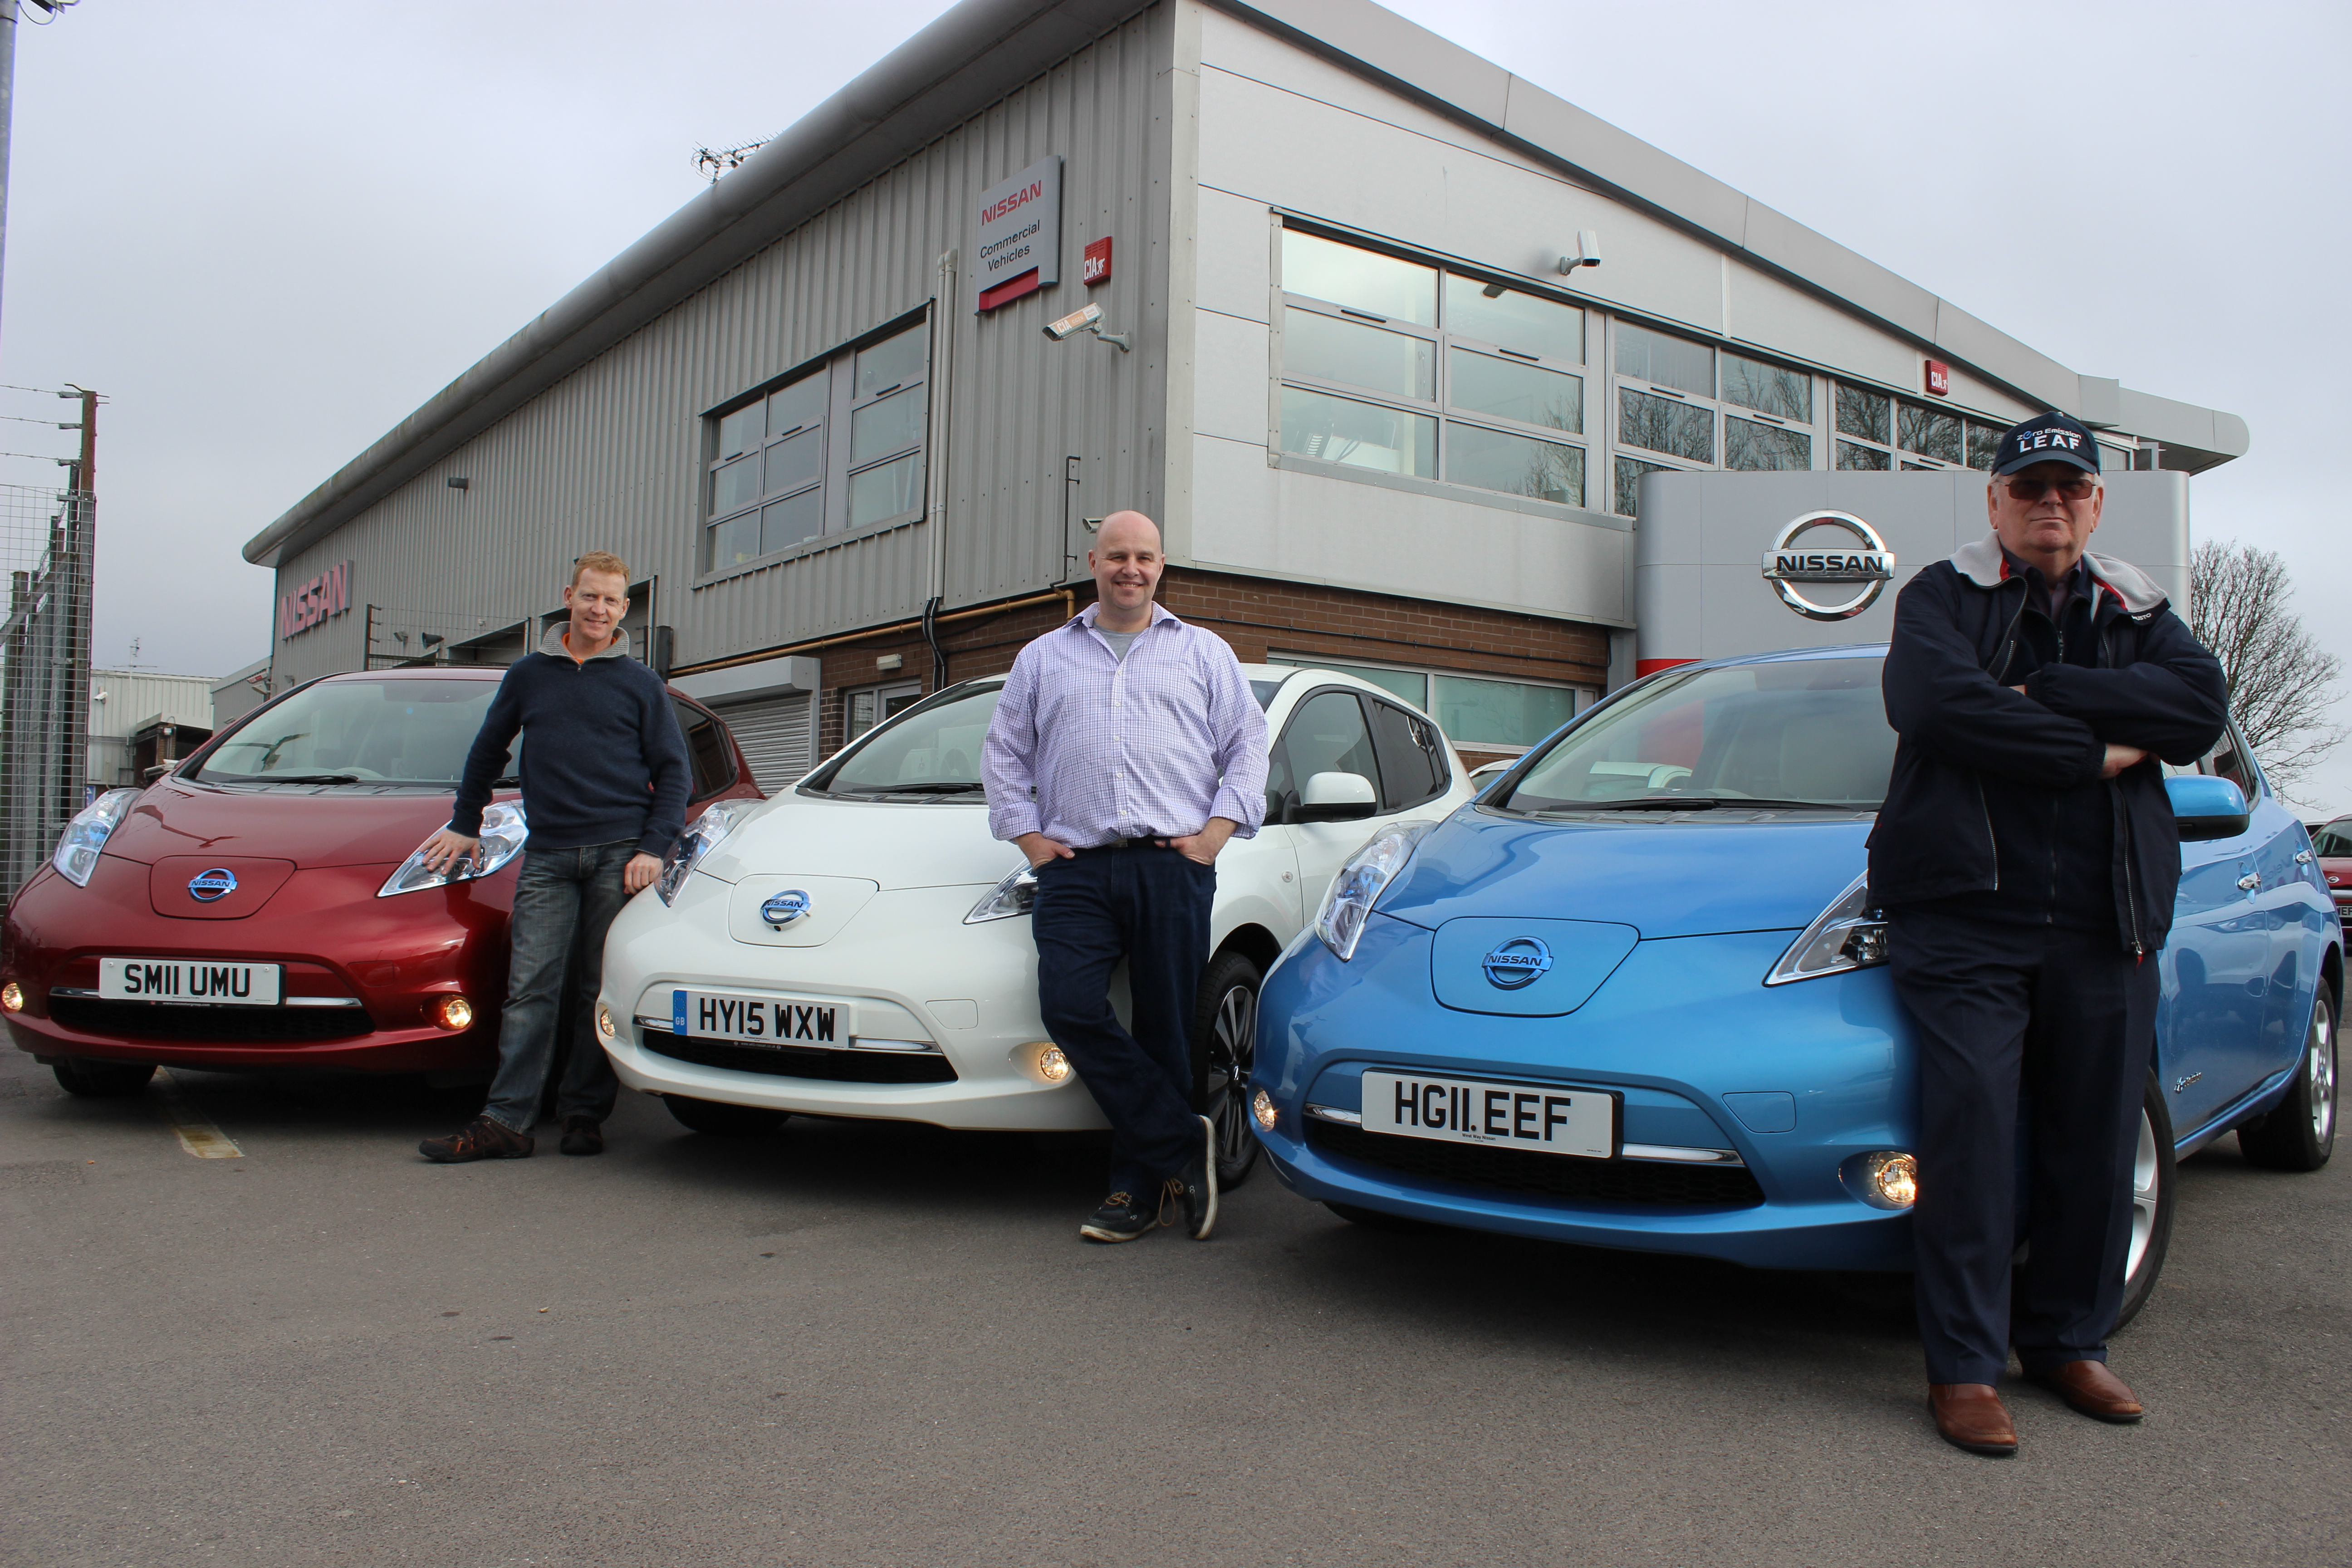 Dealer hampshire londonderry new nissan